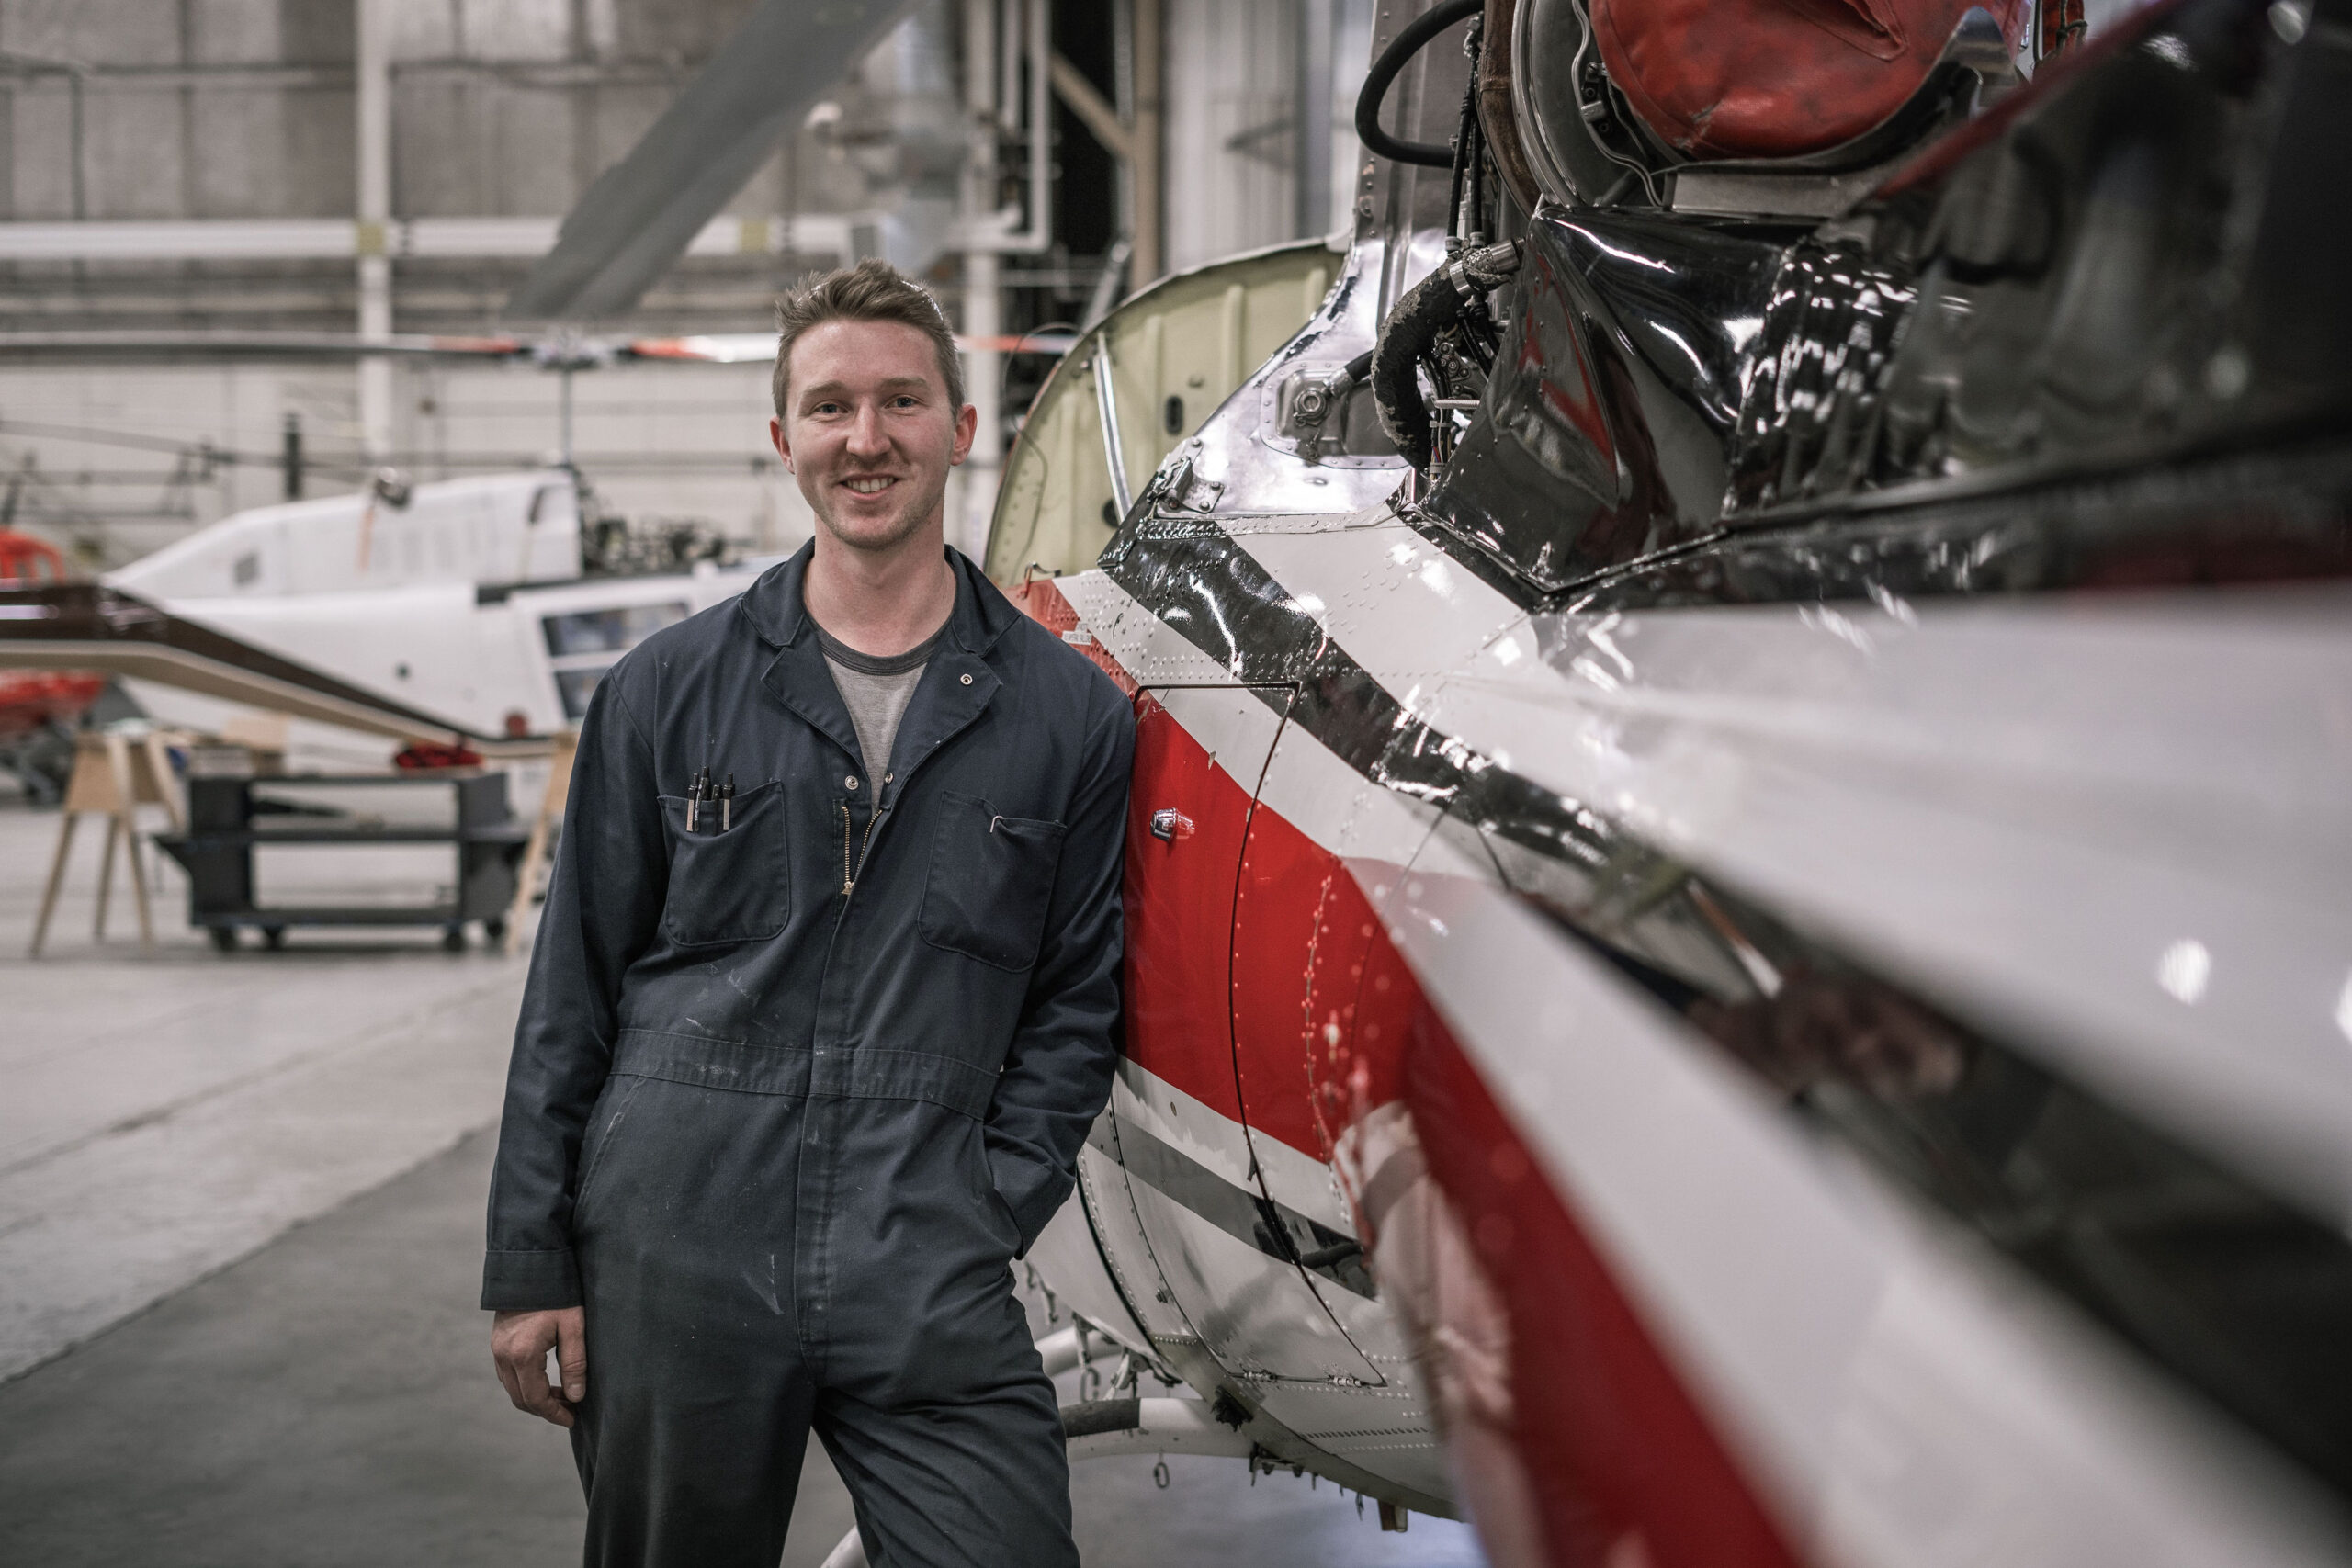 AMT student Bryce Brown stands next to a helicopter in the AMT hangar